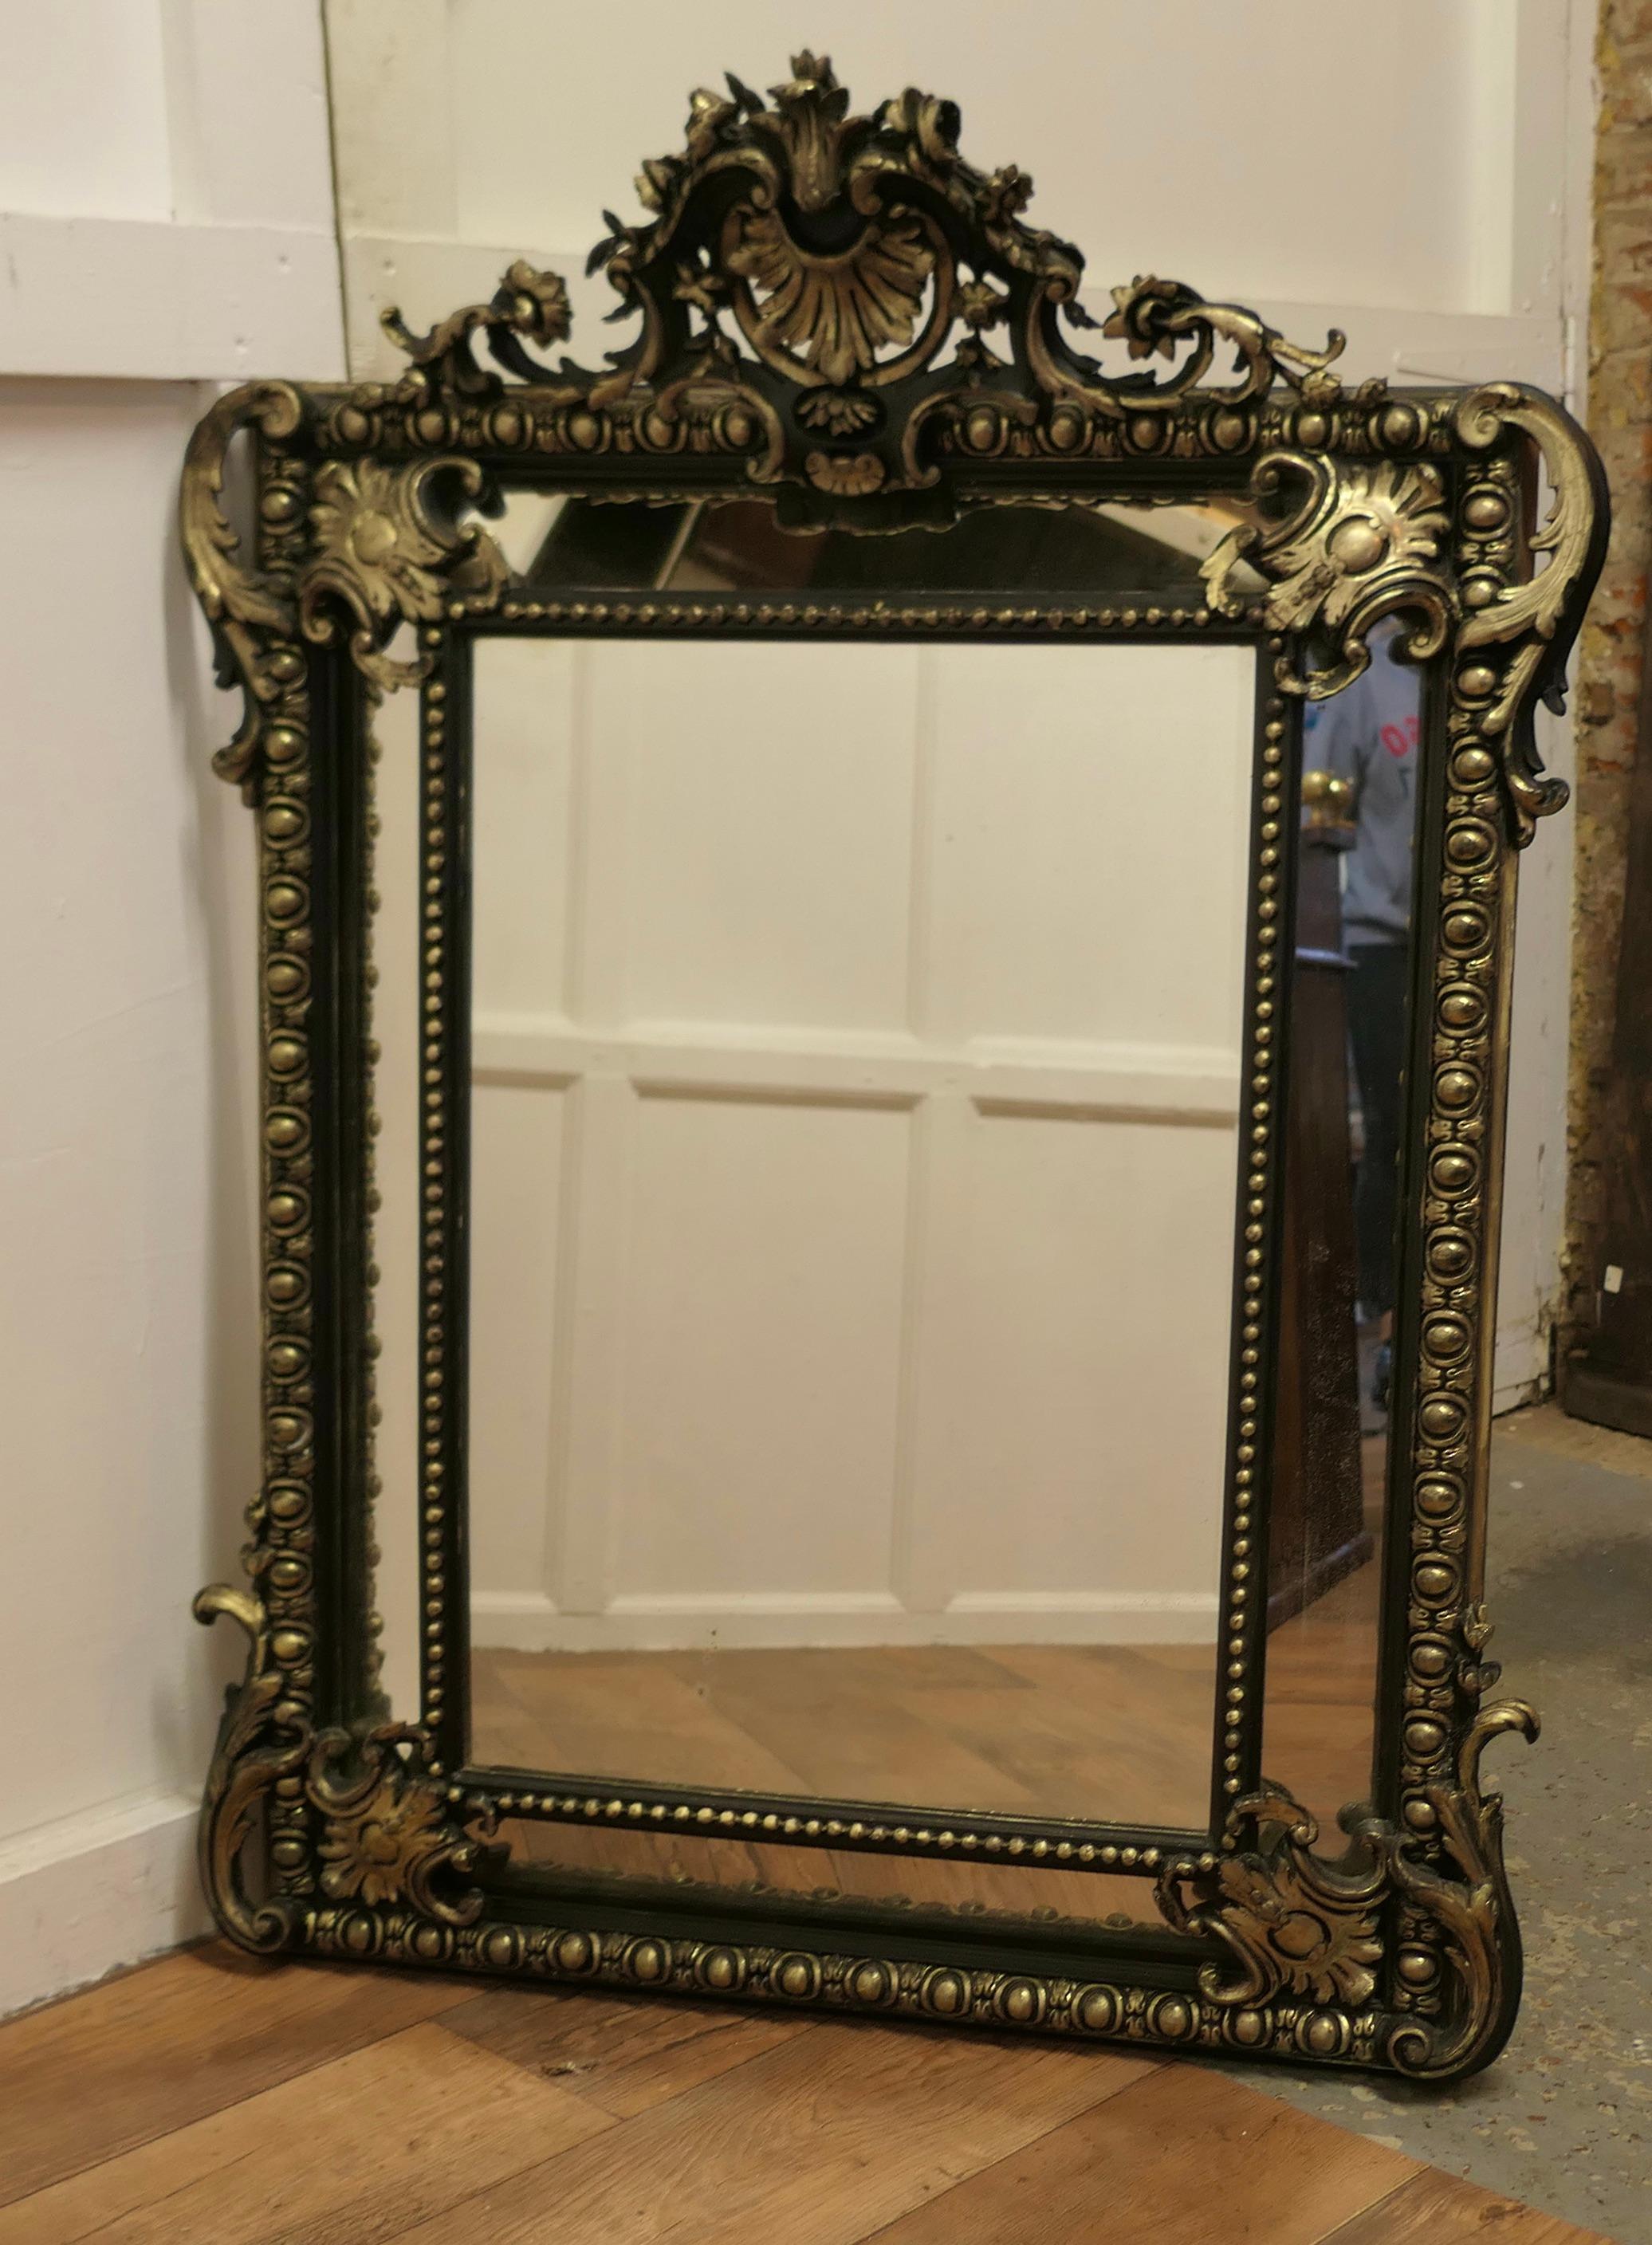 A Large Napoleon III French Cushion Mirror

This is an exquisite piece, the centre Glass is Framed with smaller angled mirrors all around and the Black and Gold Frame is decorated with Acanthus Leaves
The Mirrors are all original, the frame is very